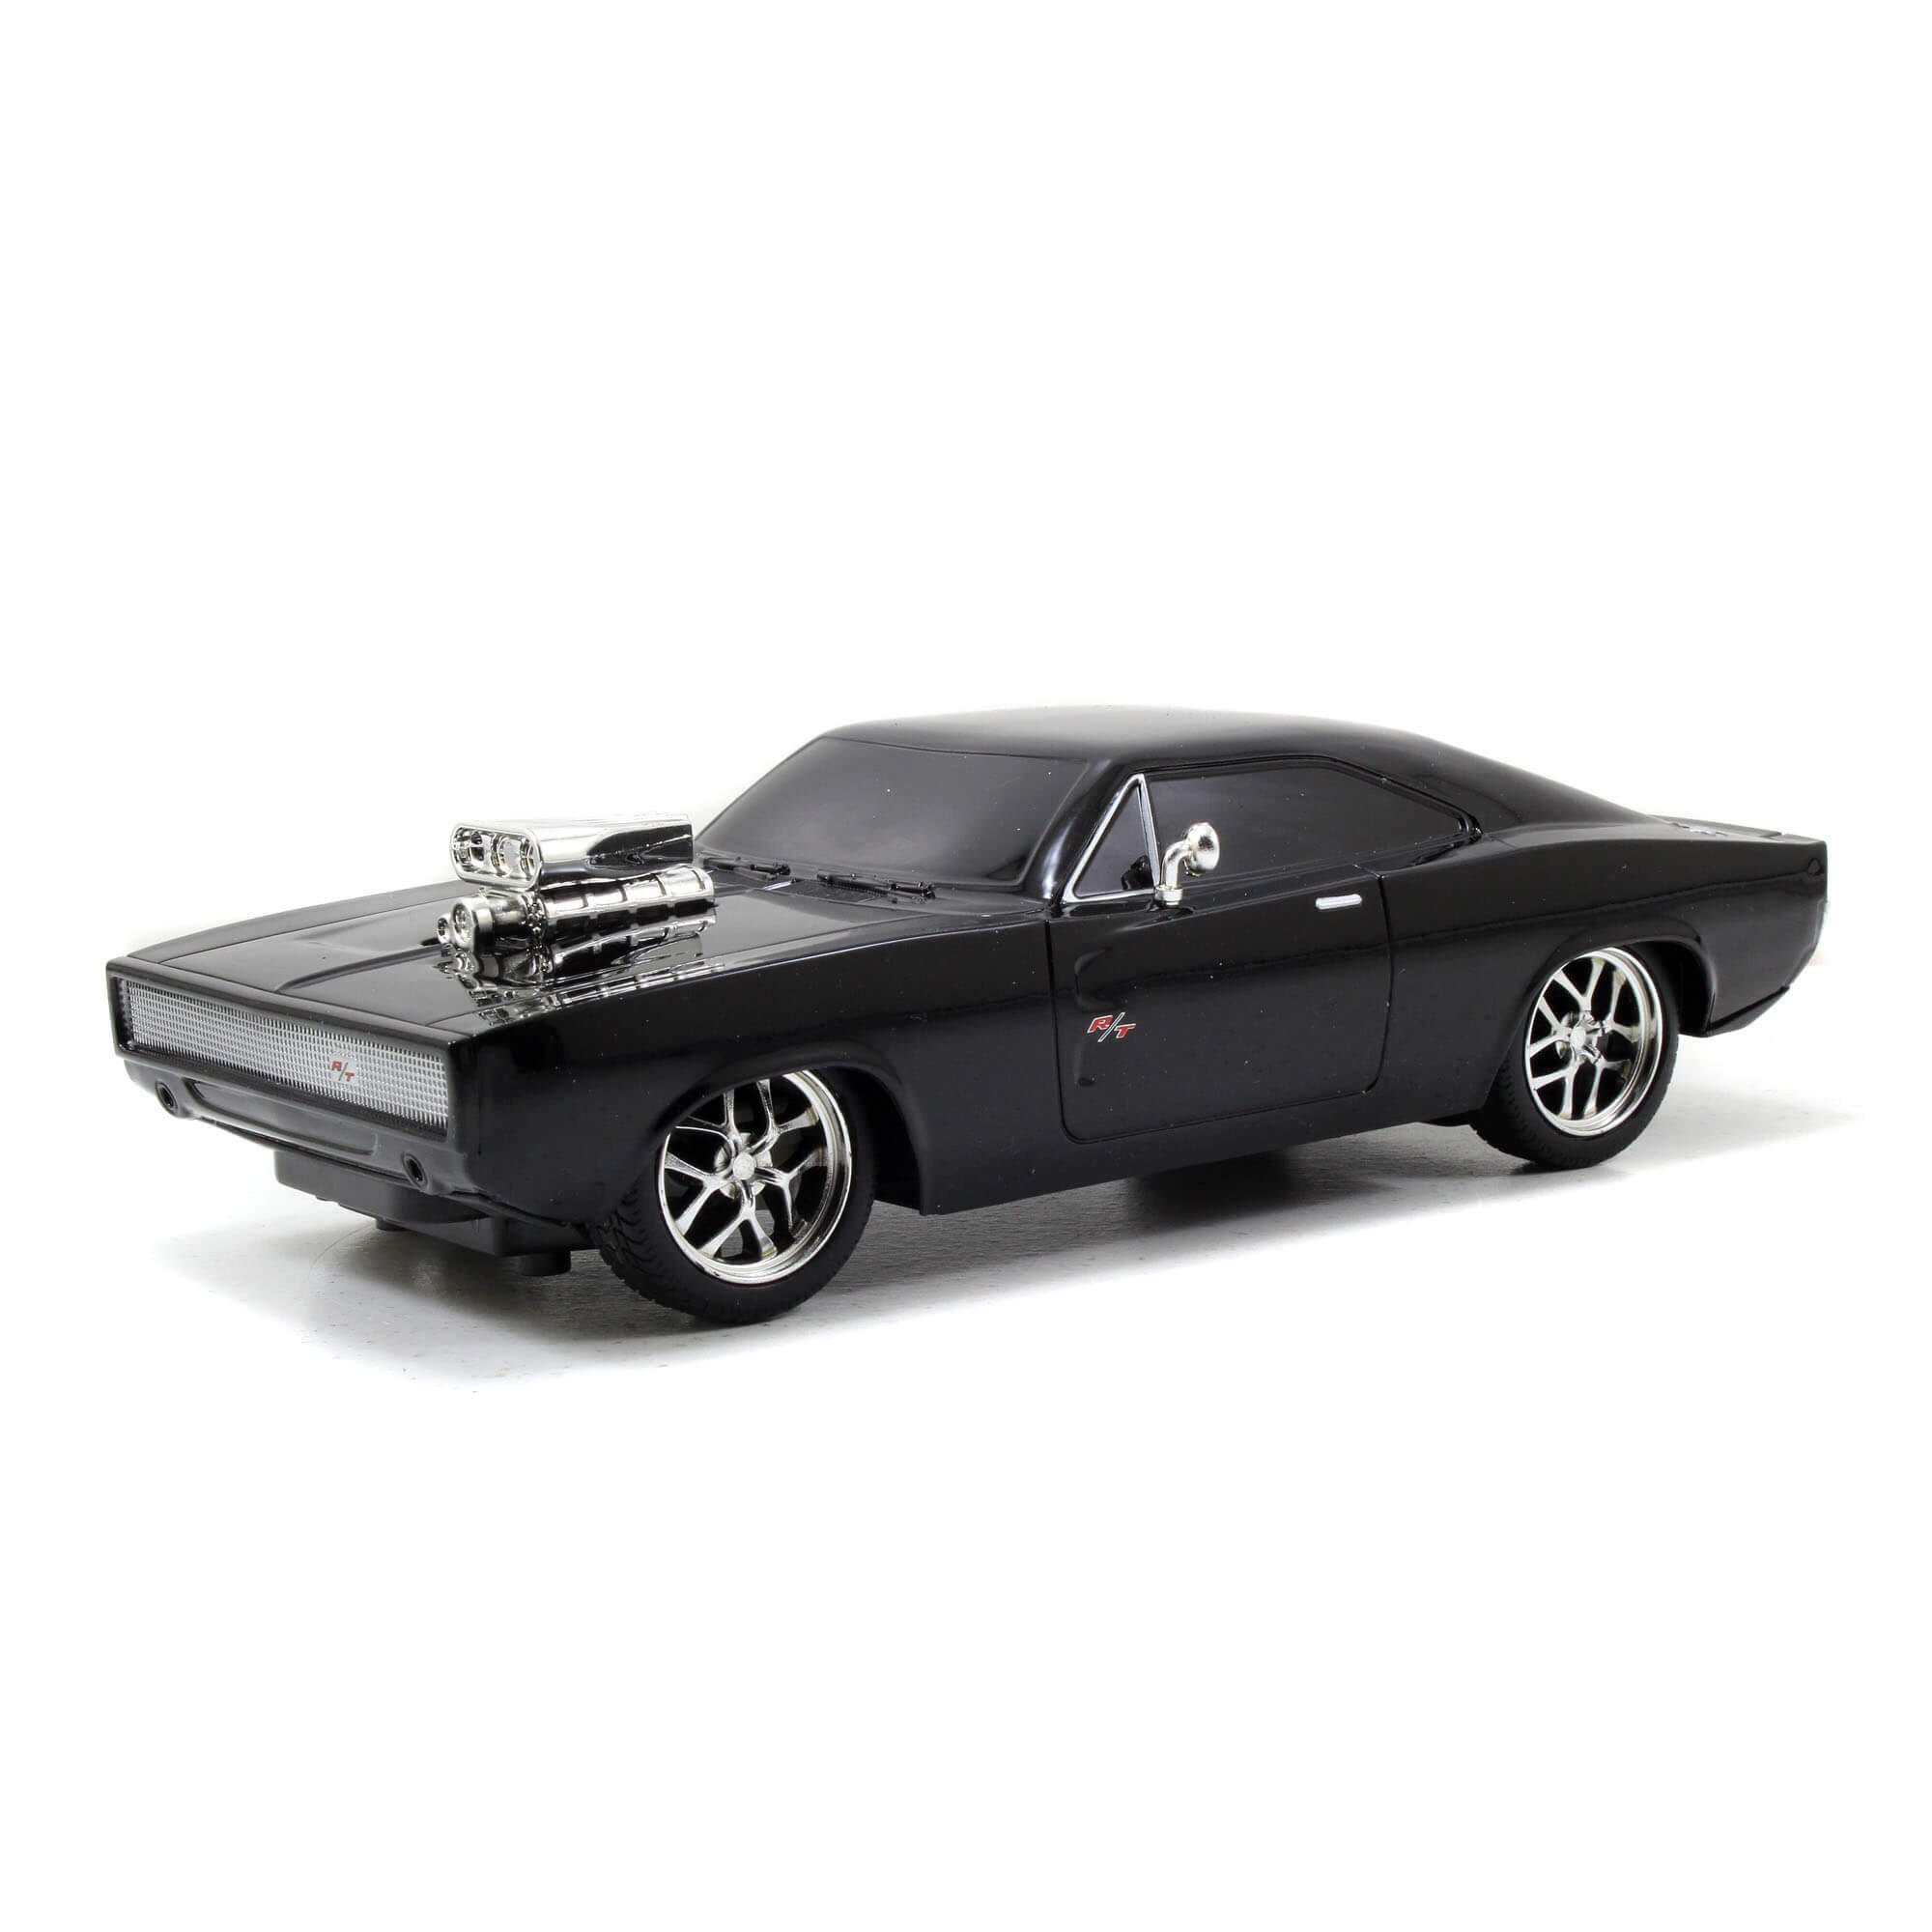 Тачки вин. 1:24 Dodge Charger 1970 RC. Dodge Charger 1 24. Charger r/t 1970 Форсаж.